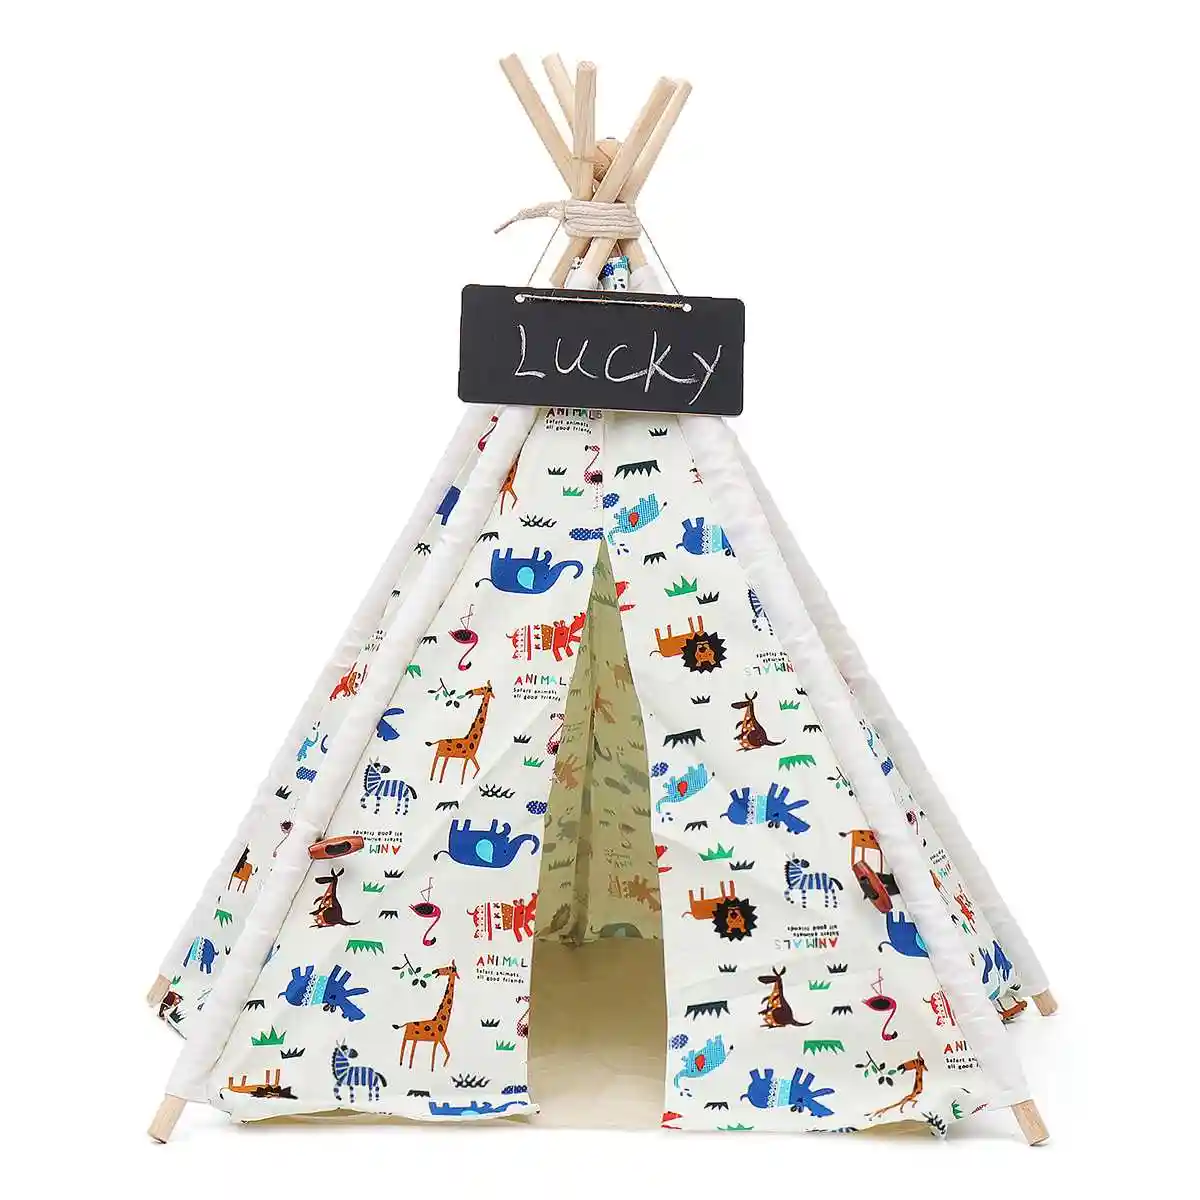 Portable Playhouse Sleeping Dome Indian Teepee Tent Children Play House White UK